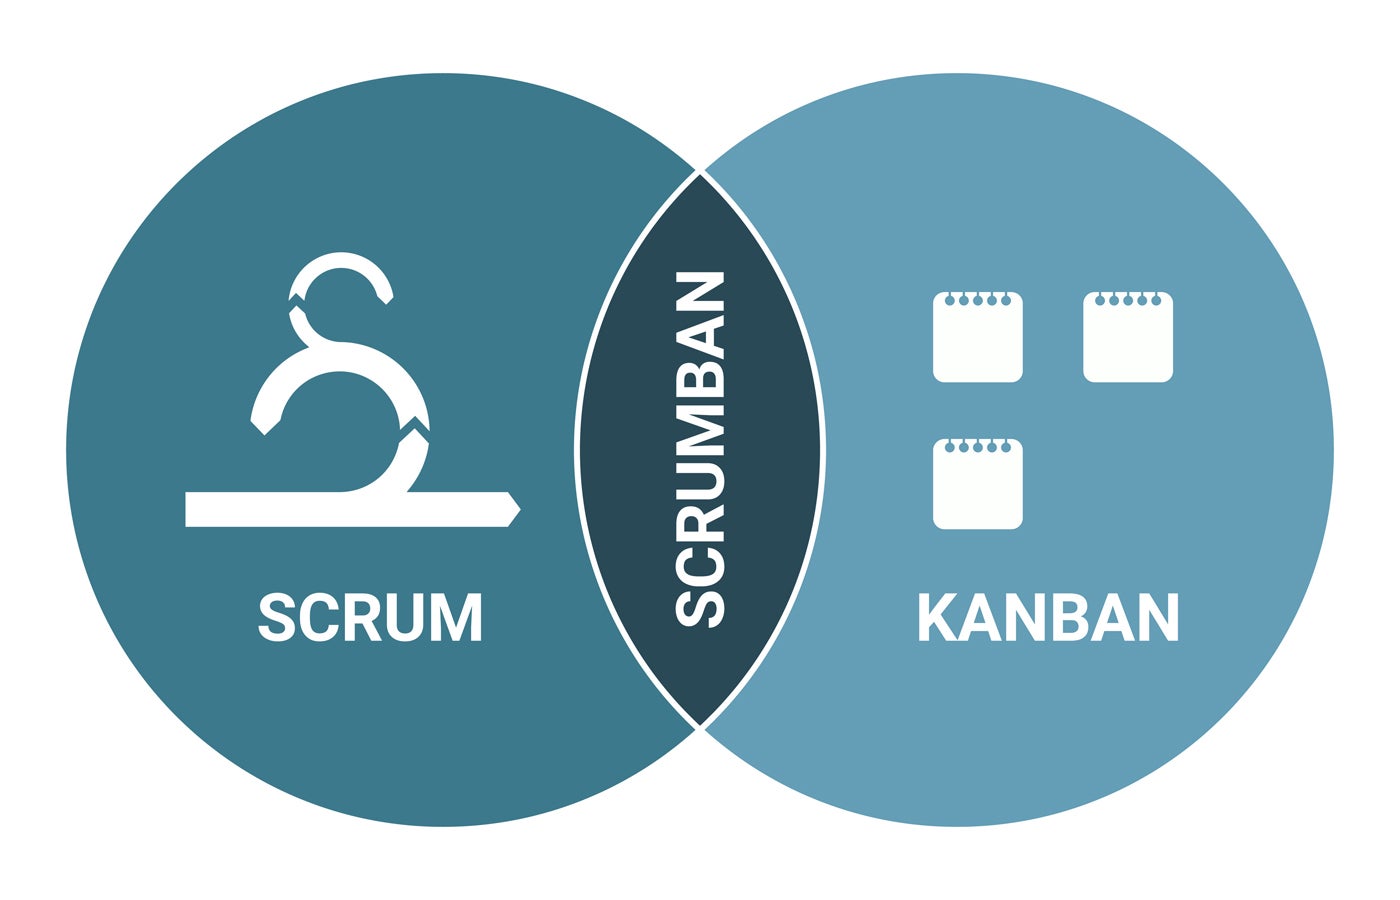 What Is Scrumban?